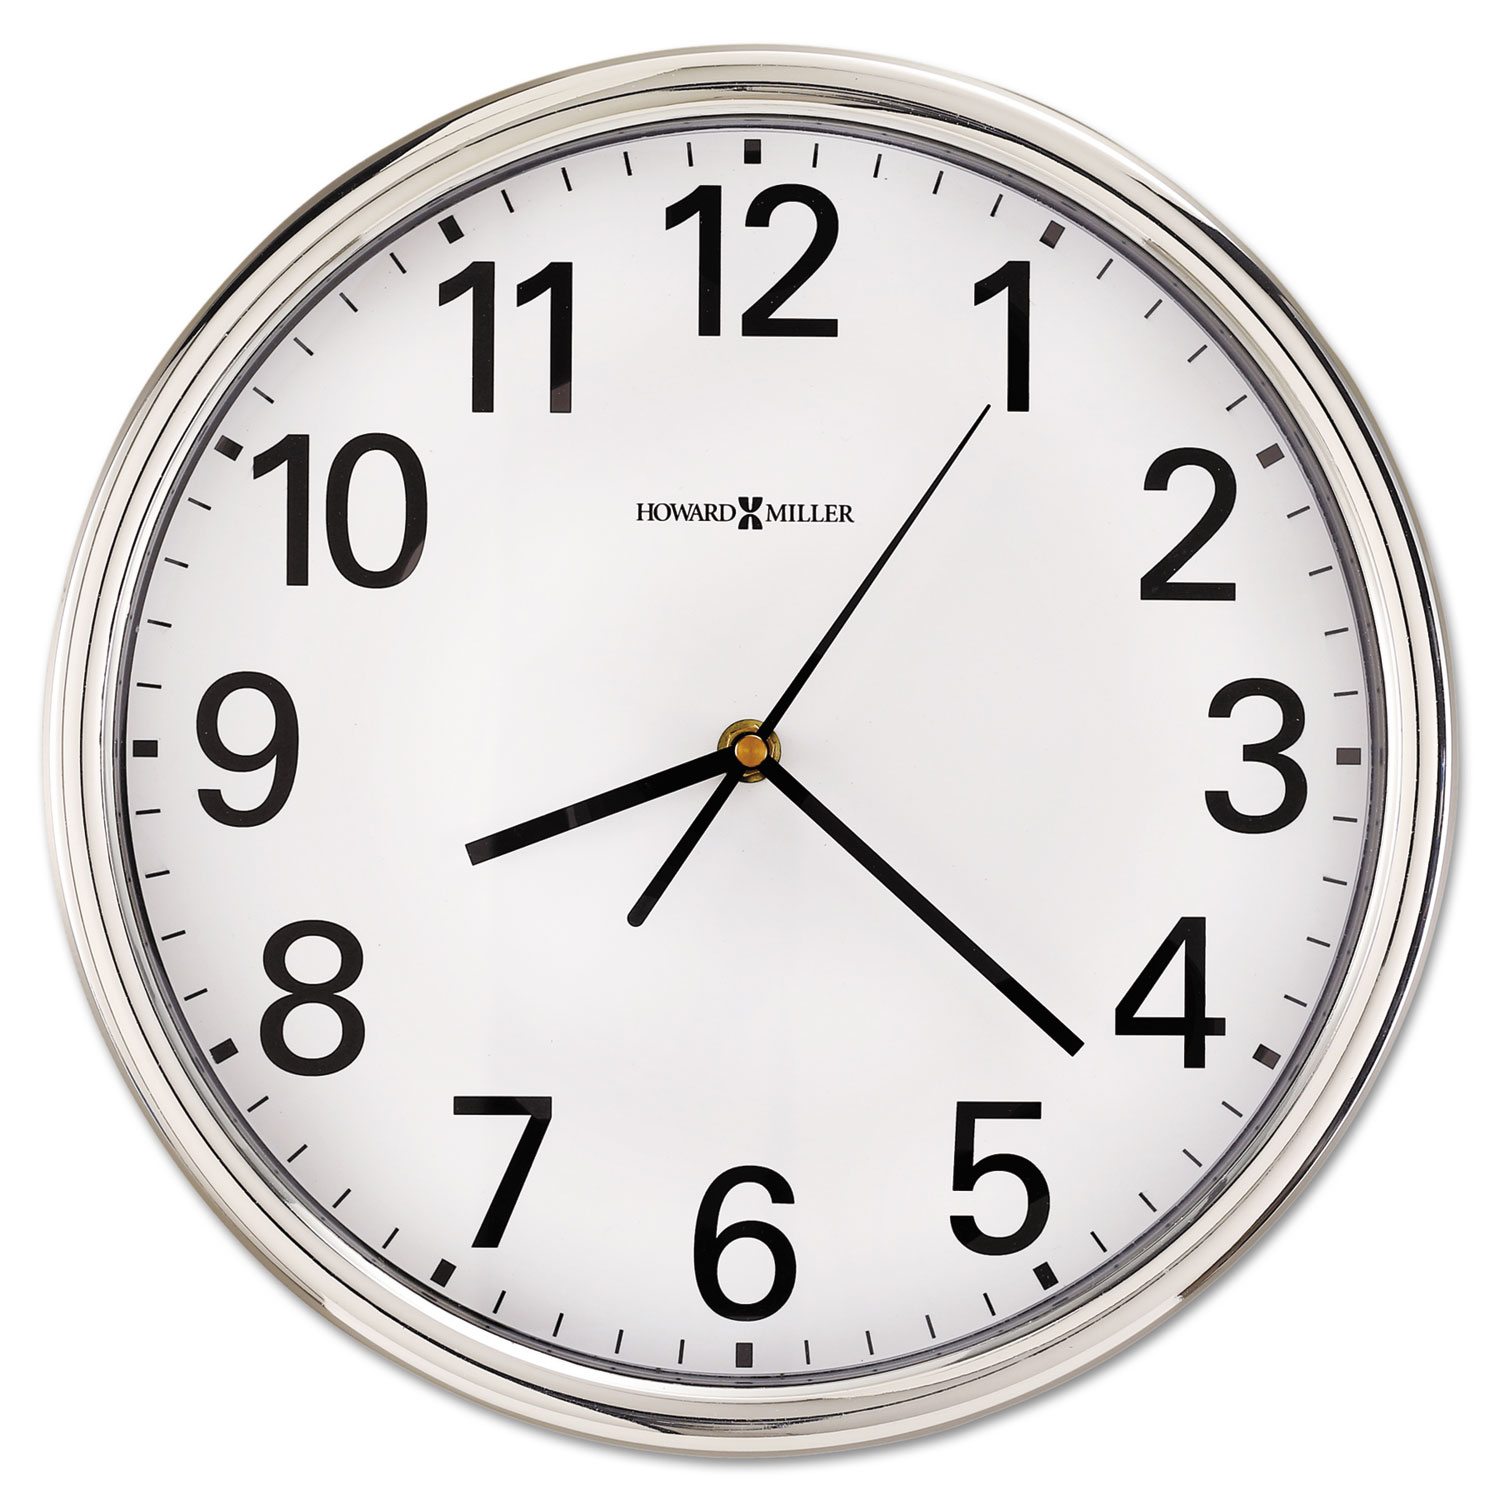  Howard Miller 625-561 Hamilton Wall Clock, 12 Overall Diameter, Silver Case, 1 AA (sold separately) (MIL625561) 